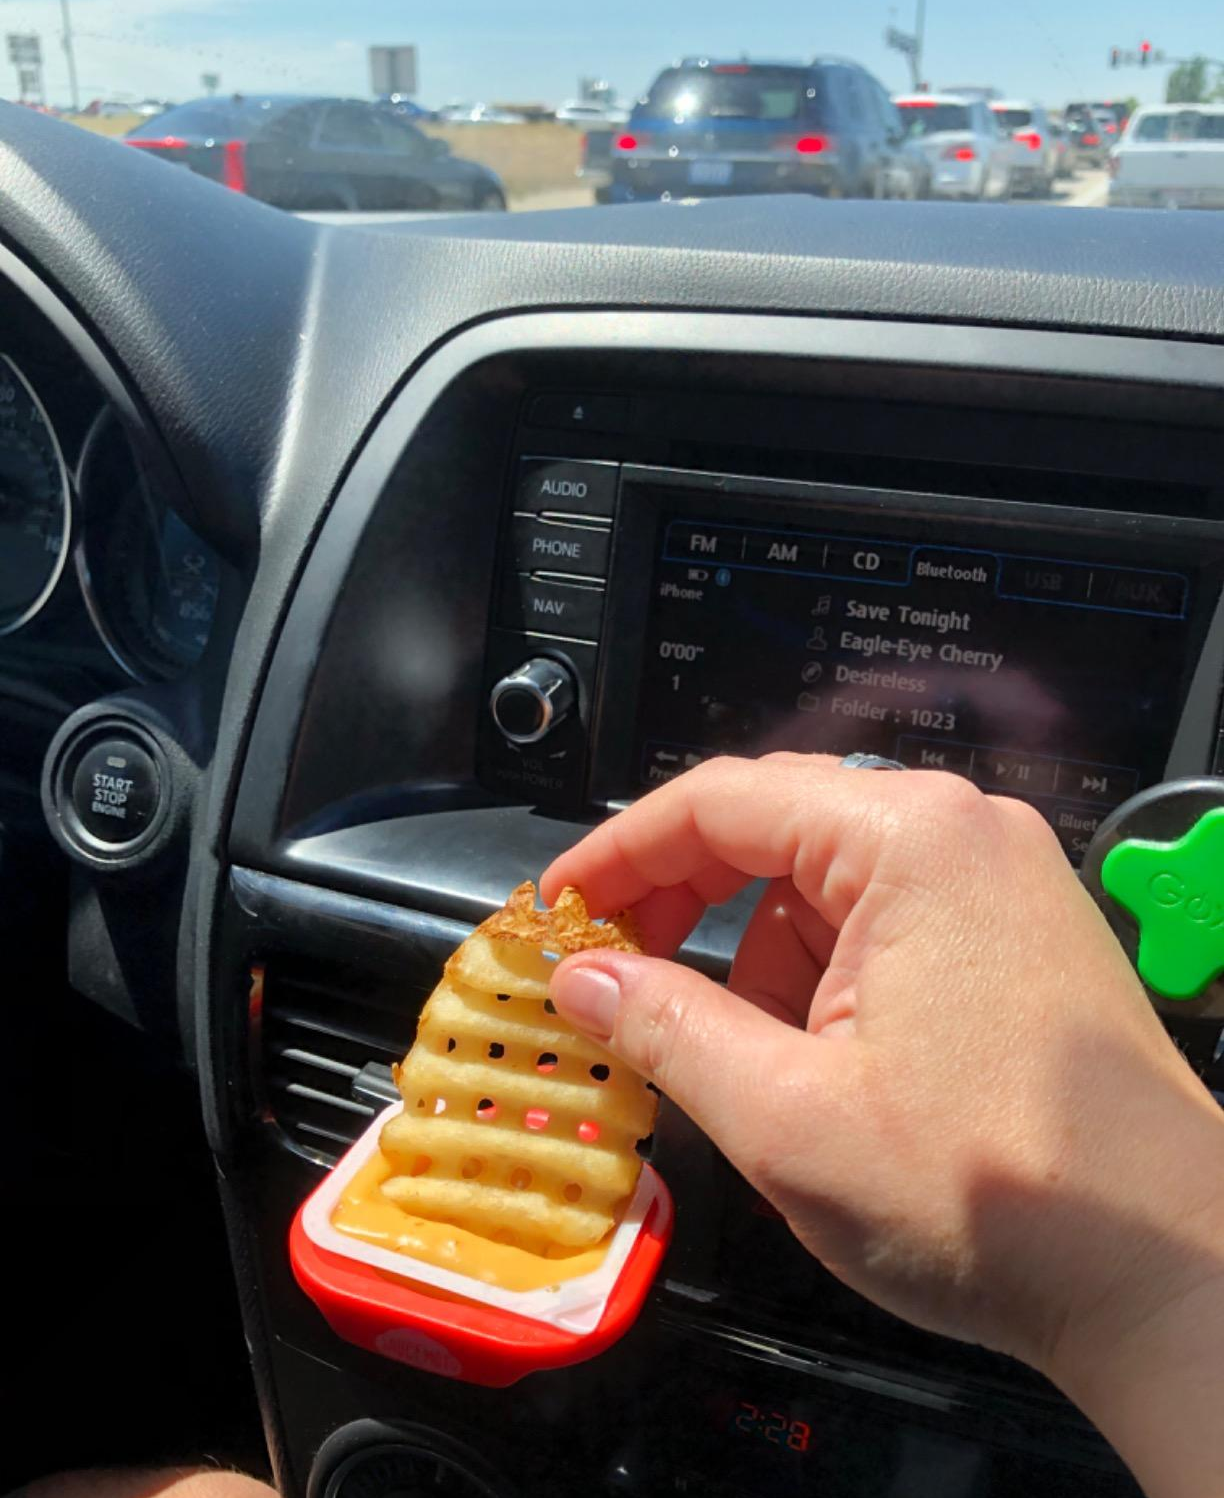 10 Clever Accessories That Can Make Car Travel More Comfortable